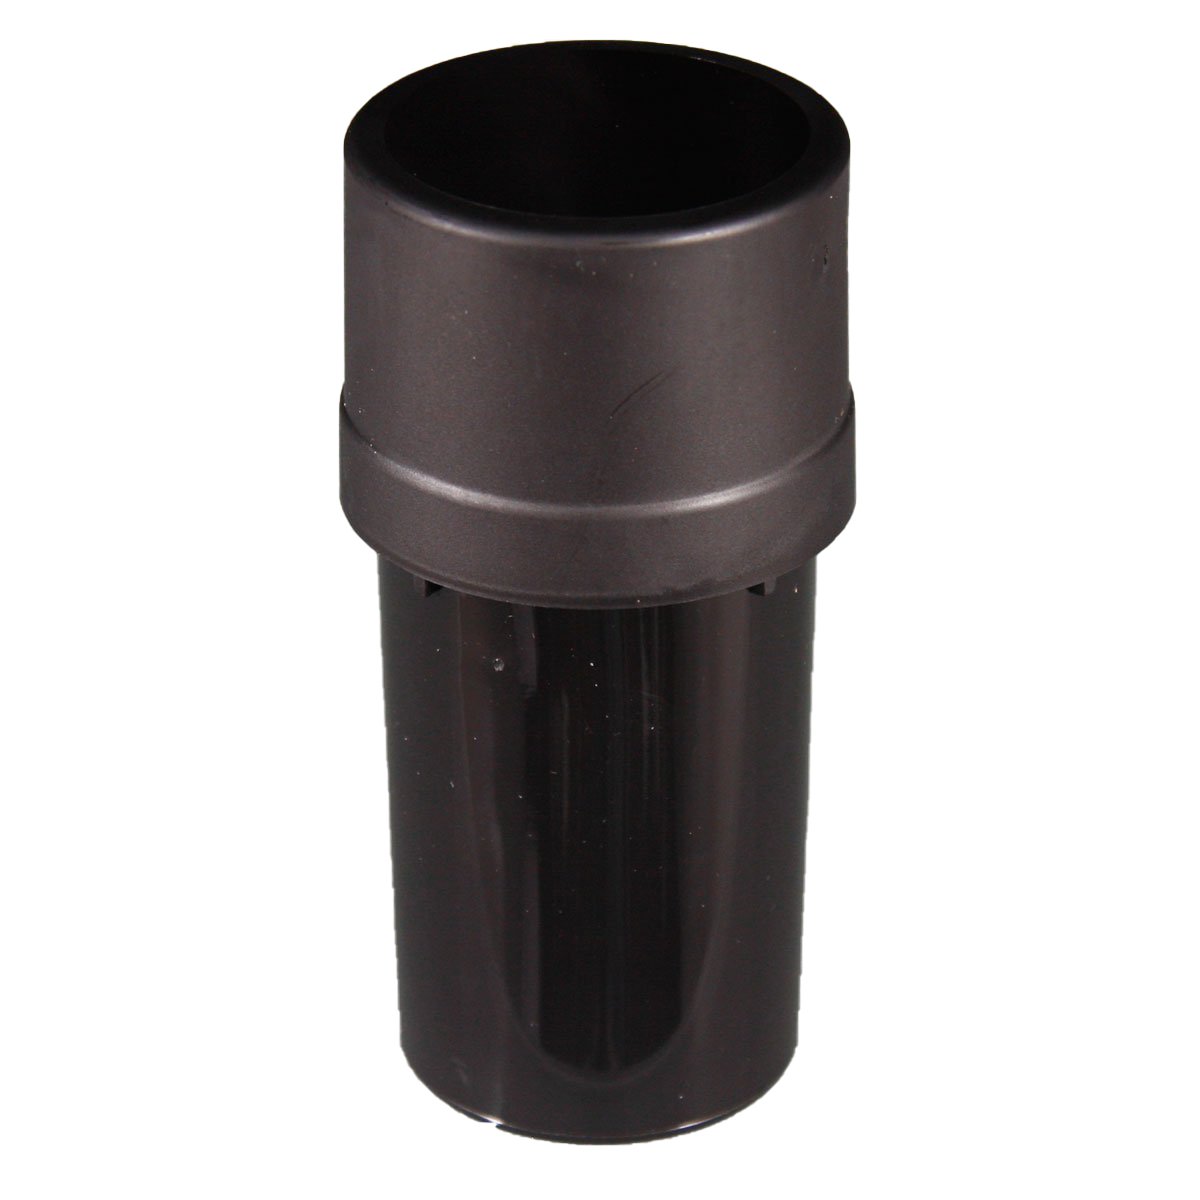 http://www.bagking.com/cdn/shop/products/airtight-storage-container-grinder-31890662588615.jpg?v=1635266926